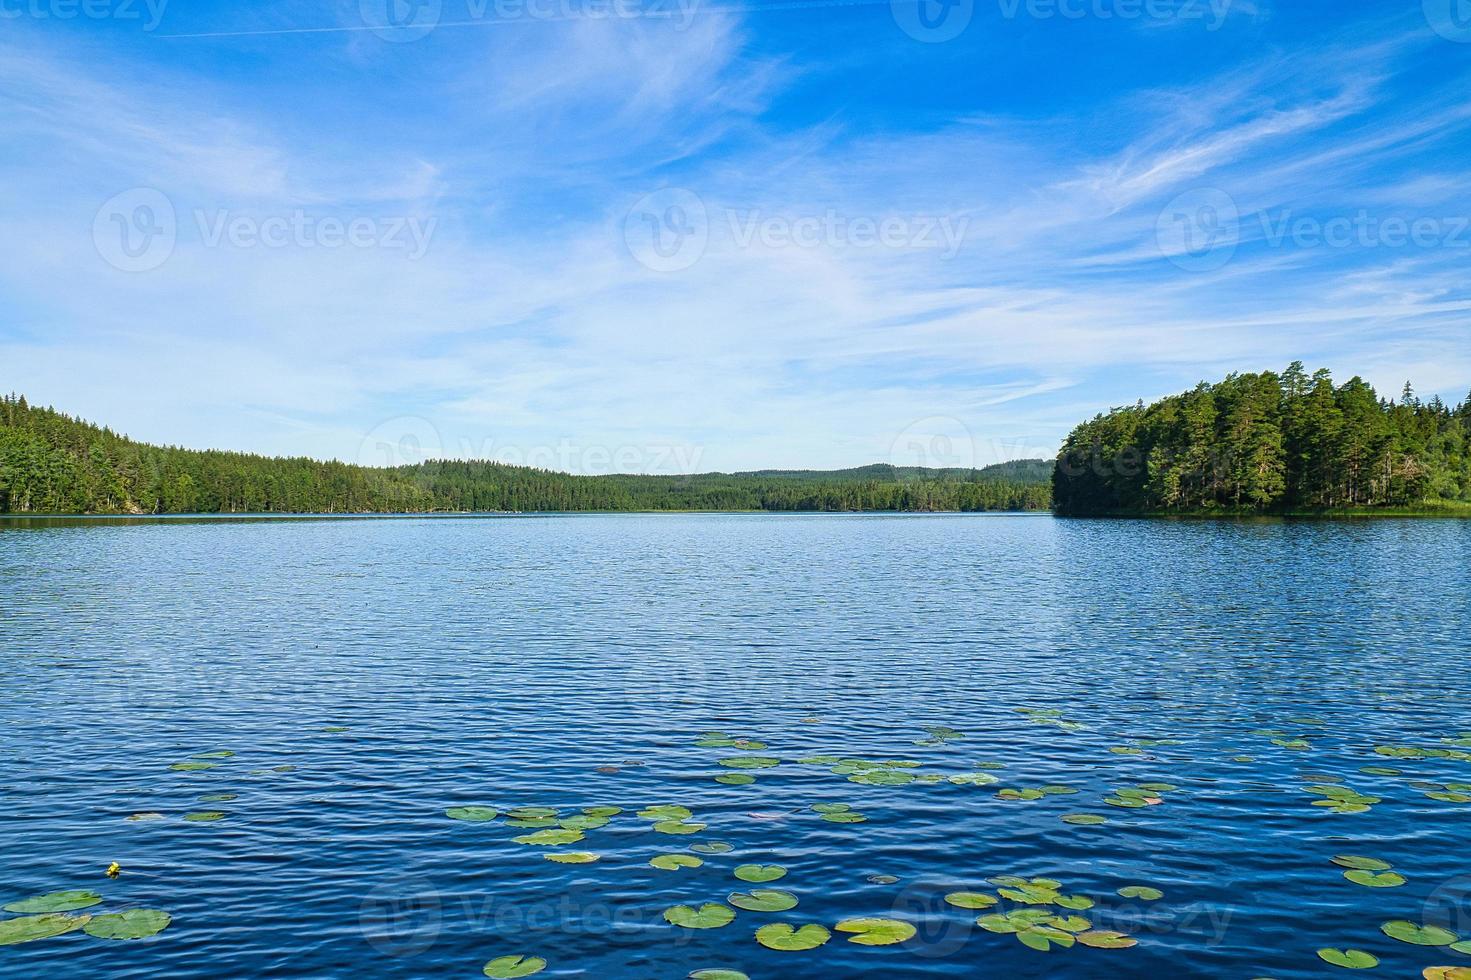 on a lake in Sweden in Smalland. Water lily field, blue water, sunny sky, forests photo